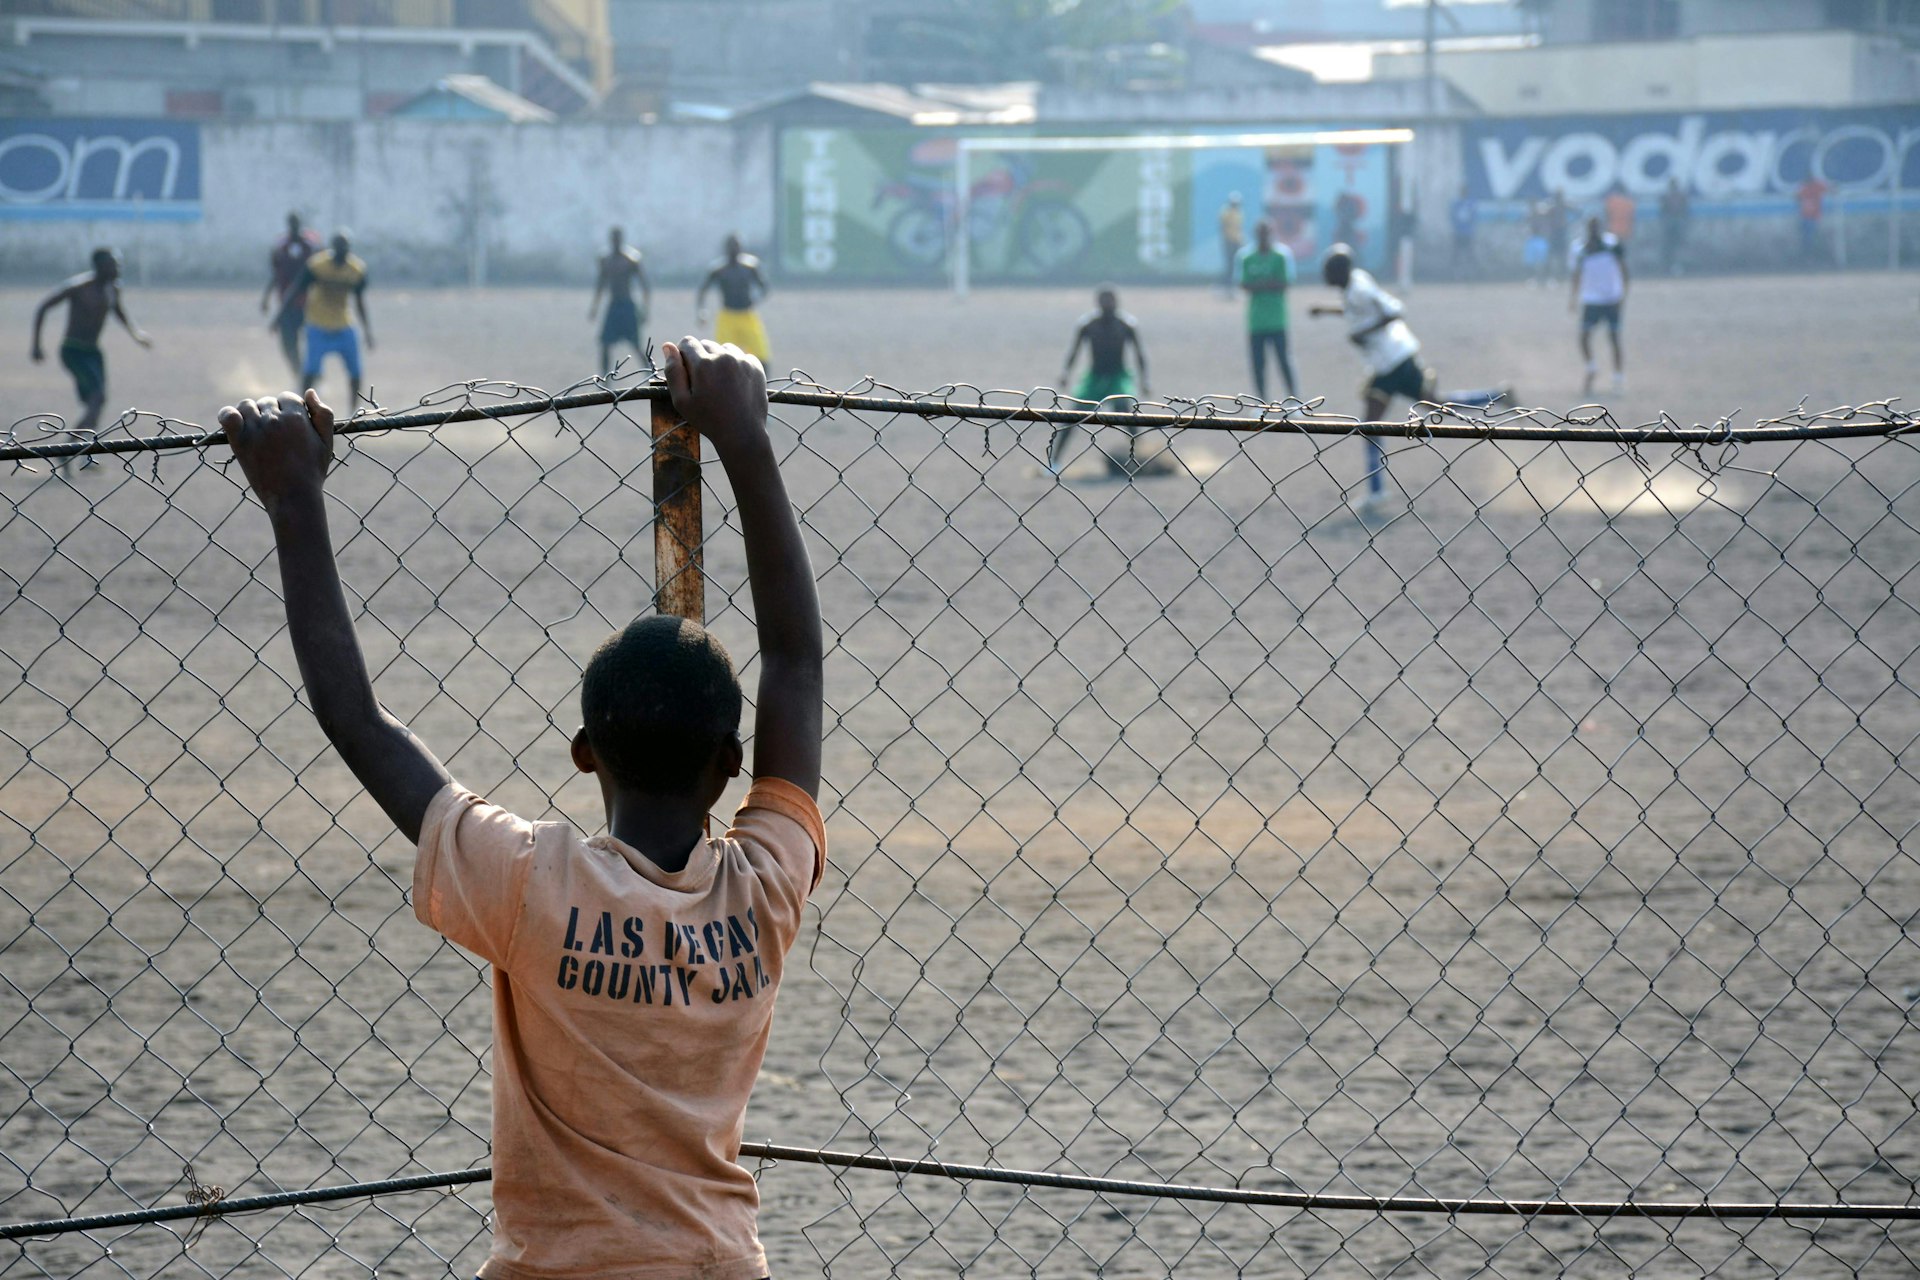 A young boy wearing a faded orange t-shirt watches older men play soccer on a dirt field through a chain-linked fence.